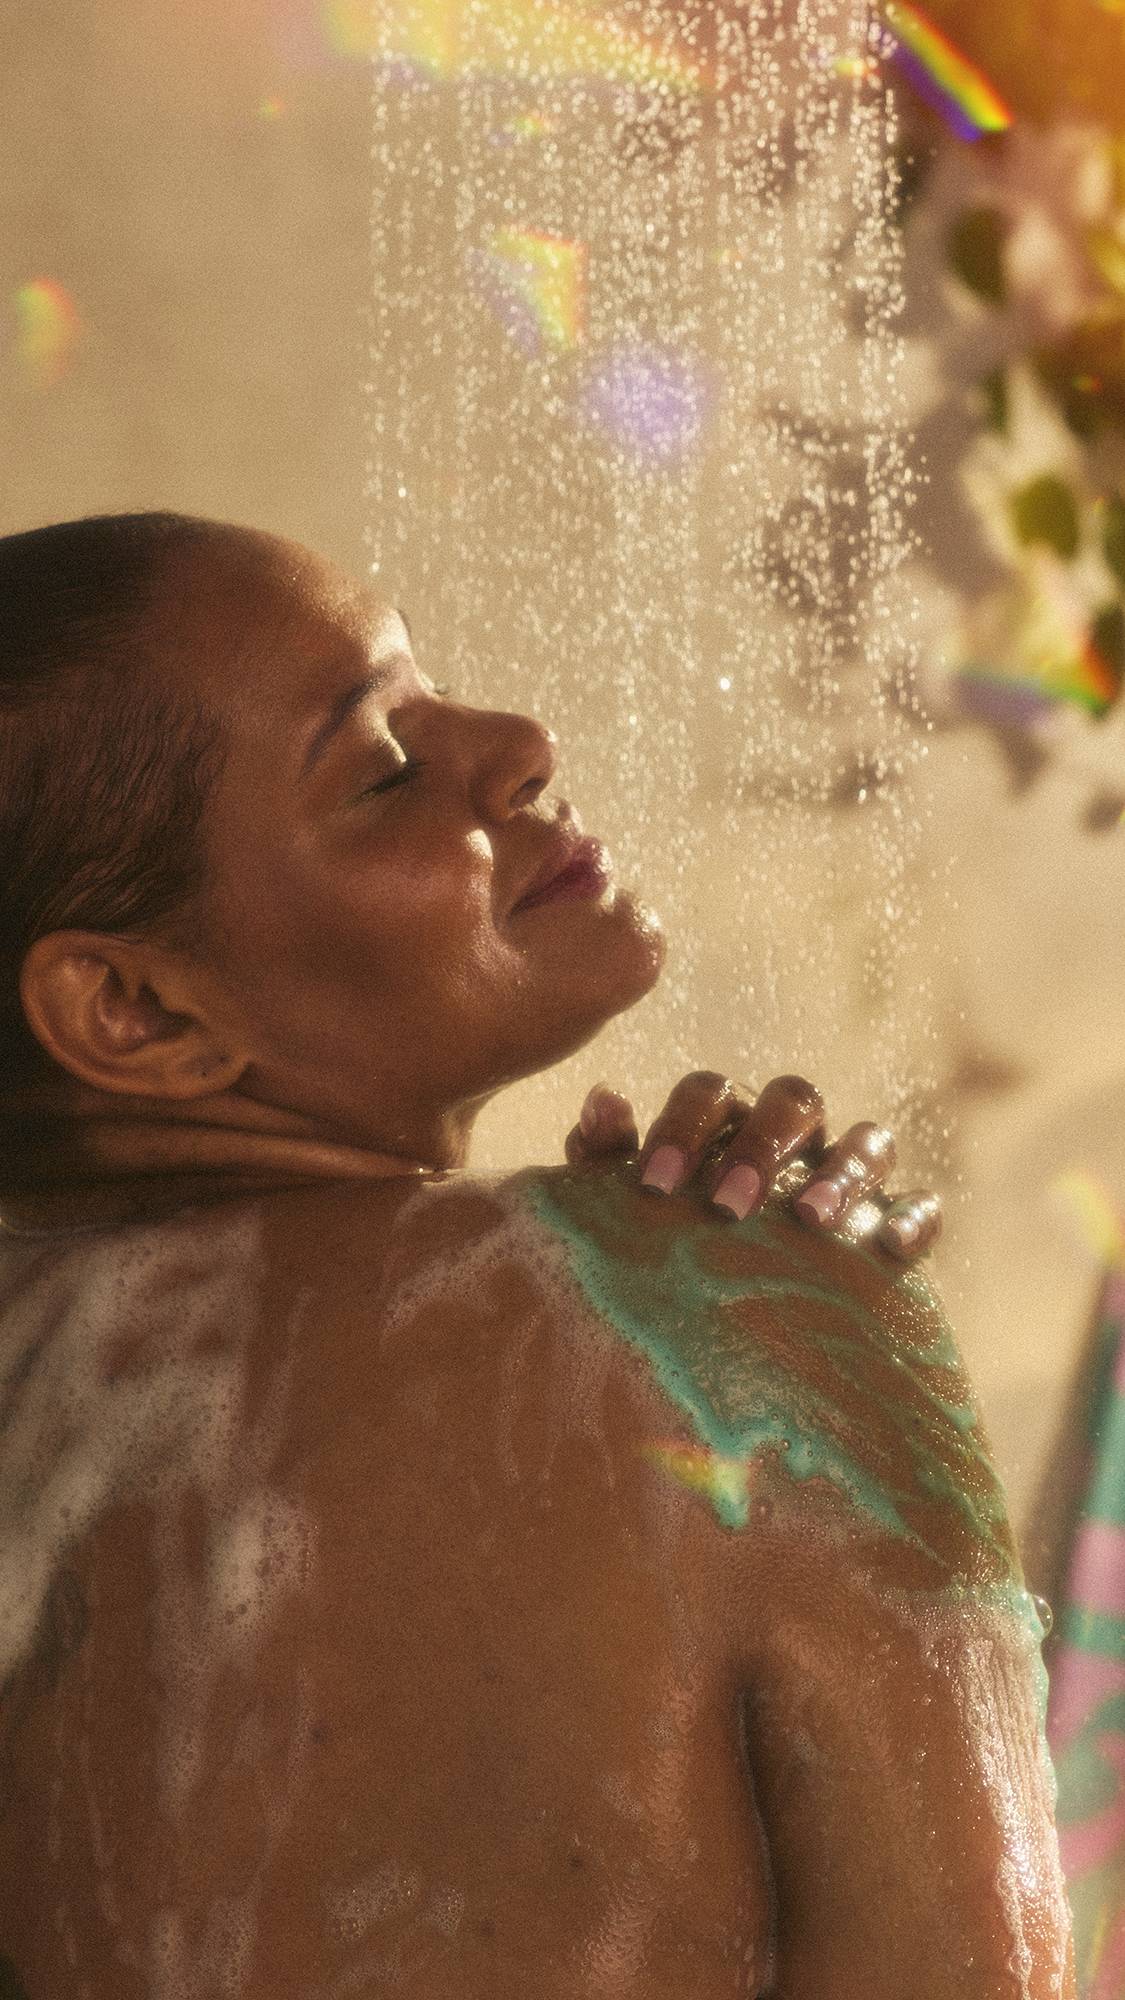 The model is under the running shower water facing away as they lather the Magik shower gel over their shoulder. The image has flecks of rainbow reflections on a warm, sepia tone.